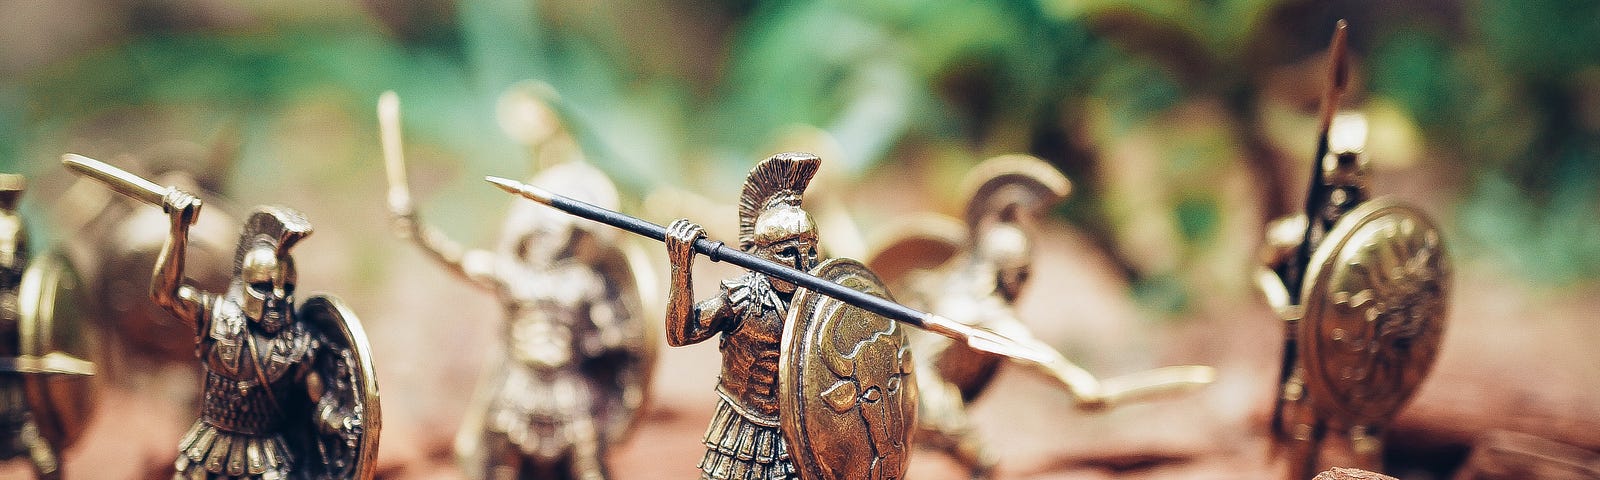 close up of ancient army figurines